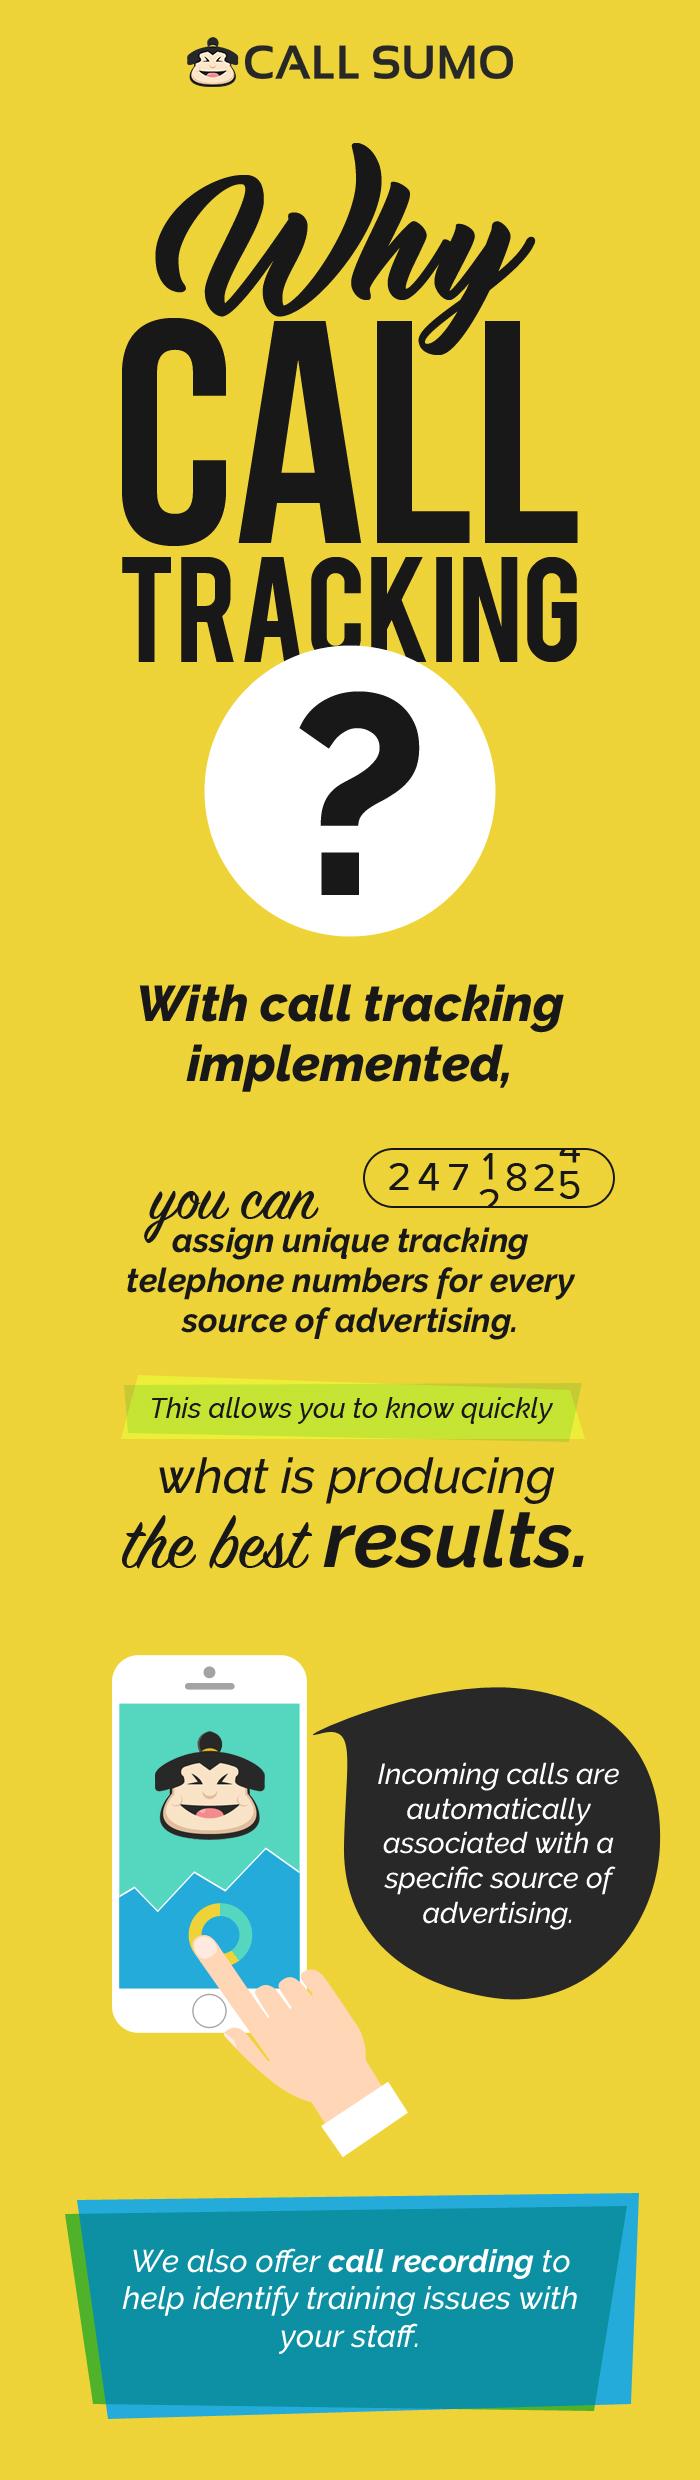 Why You Use Call Sumo’s Call Tracking?